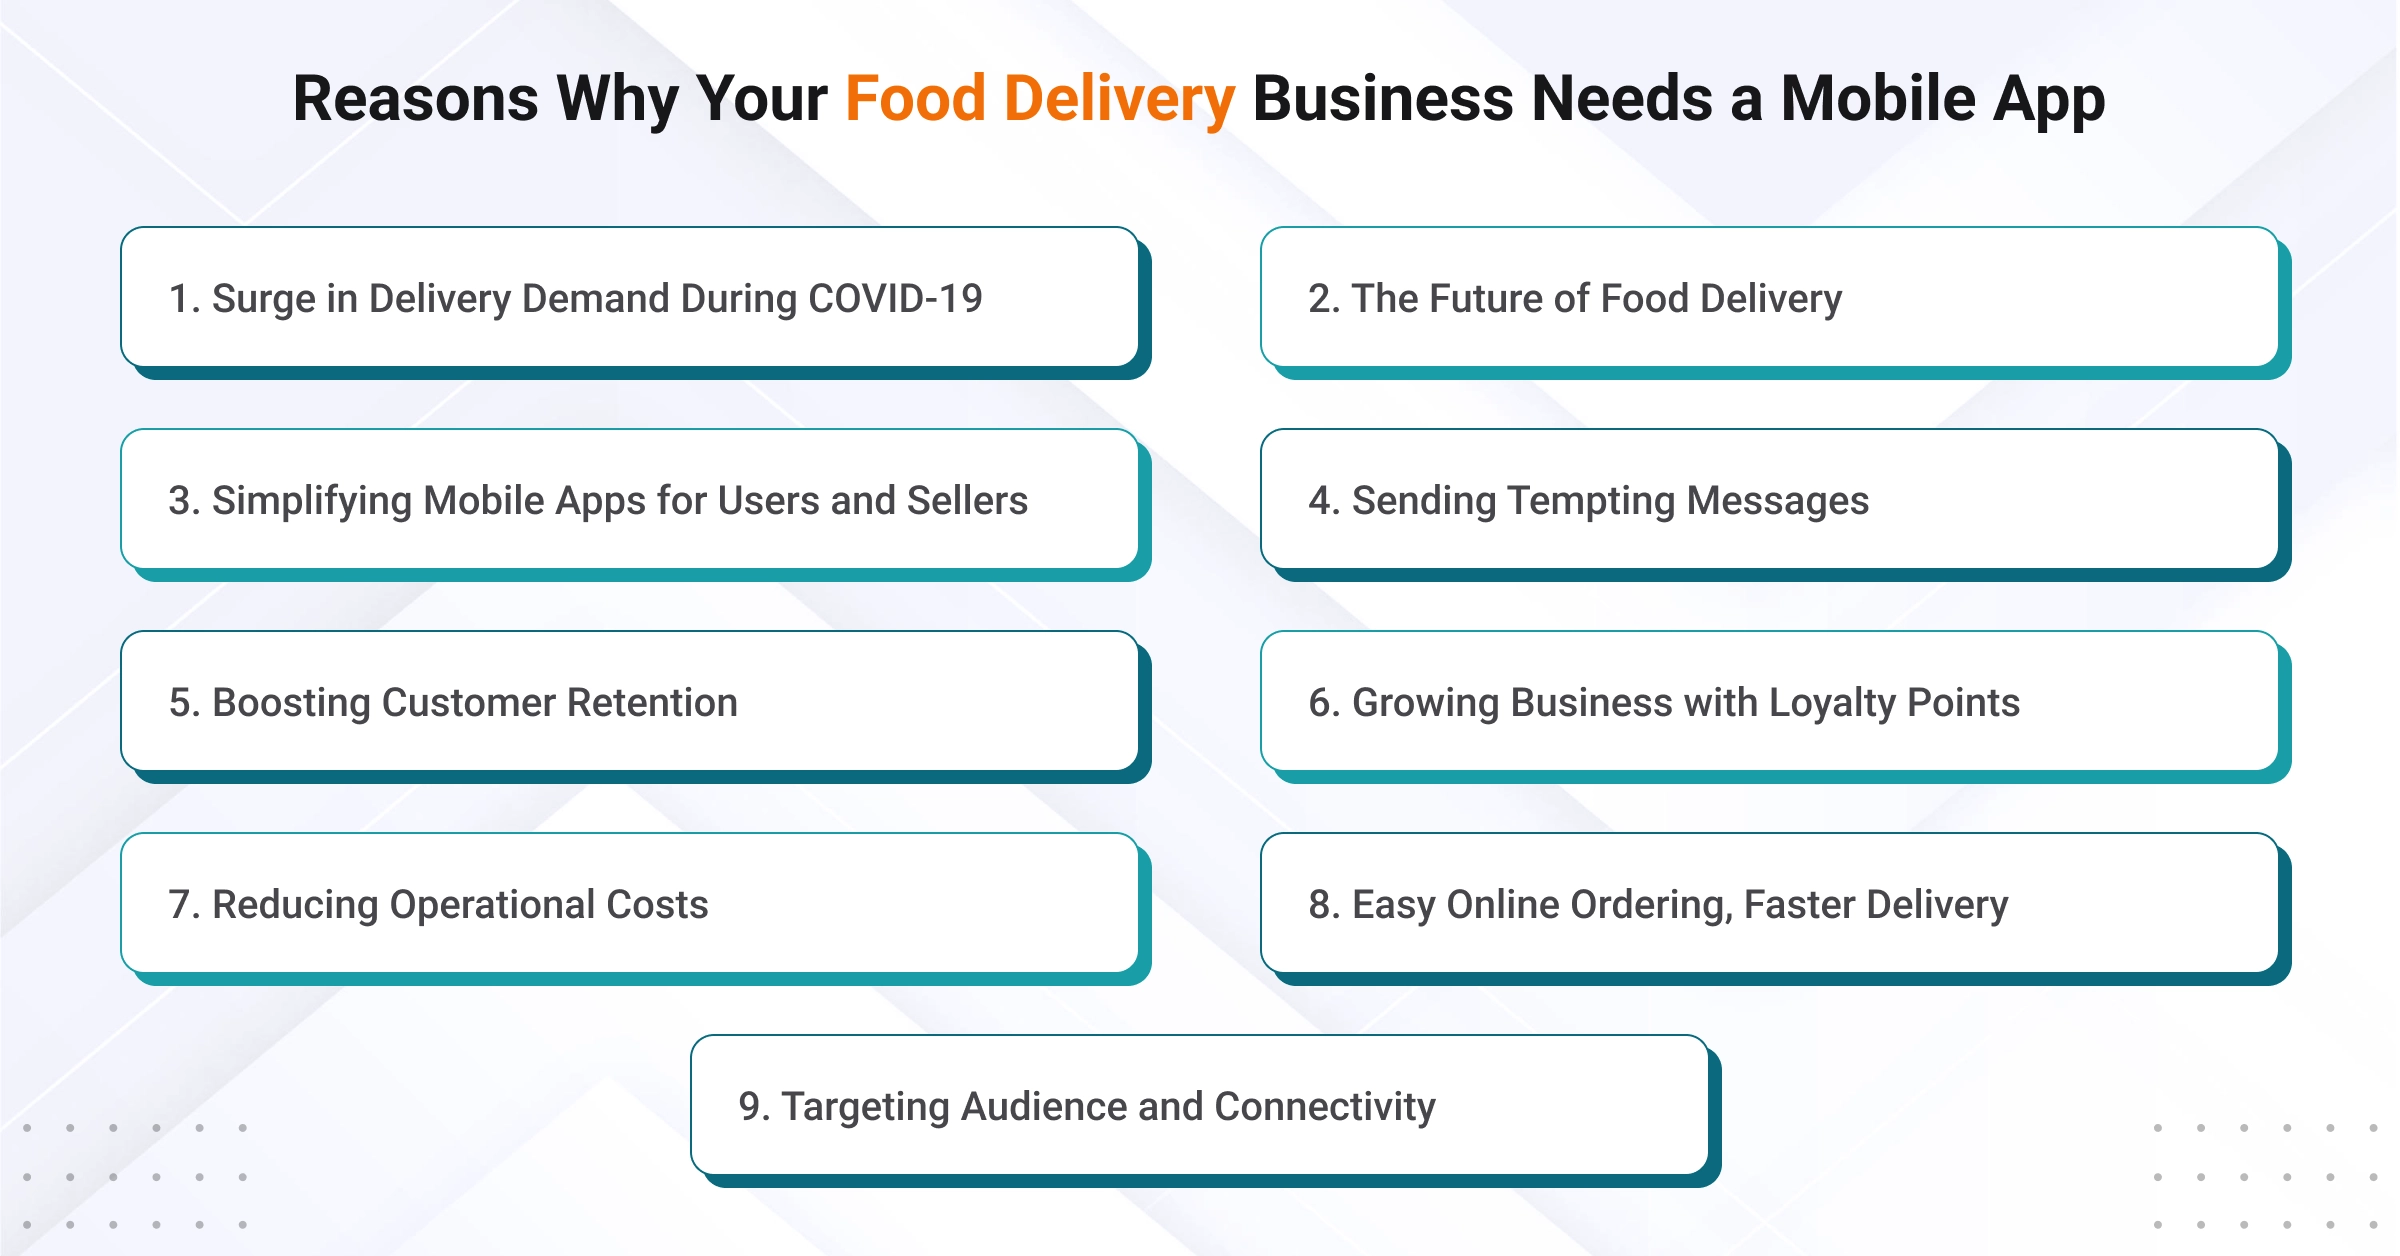 2.1 Reasons Why Your Food Delivery Business Needs a Mobile App